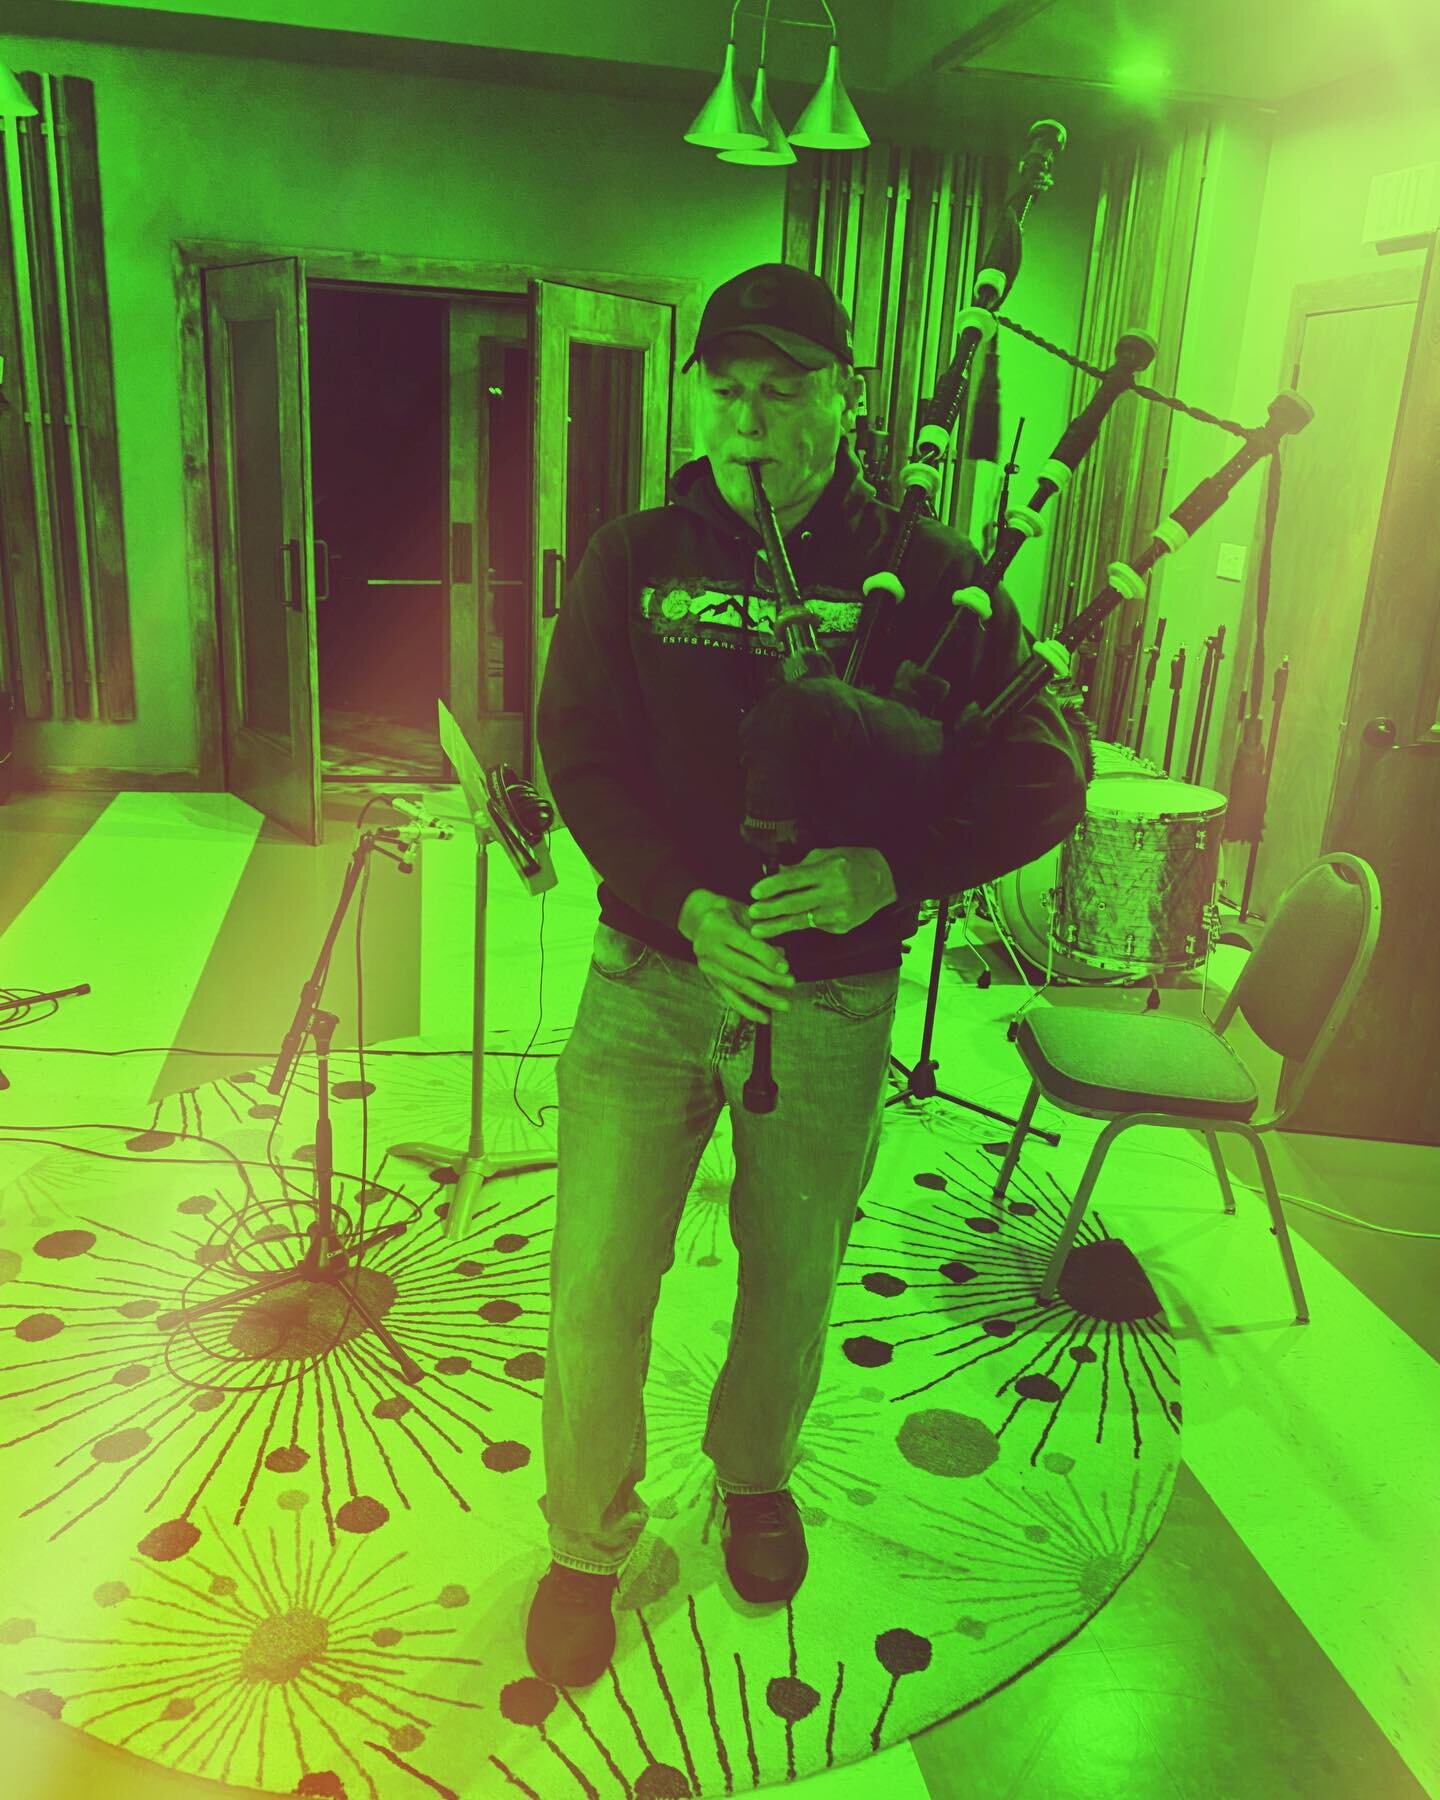 Bagpipe recording is the perfect way to start the day! ☘️ 🇮🇪 🍺 #happystpatricksday